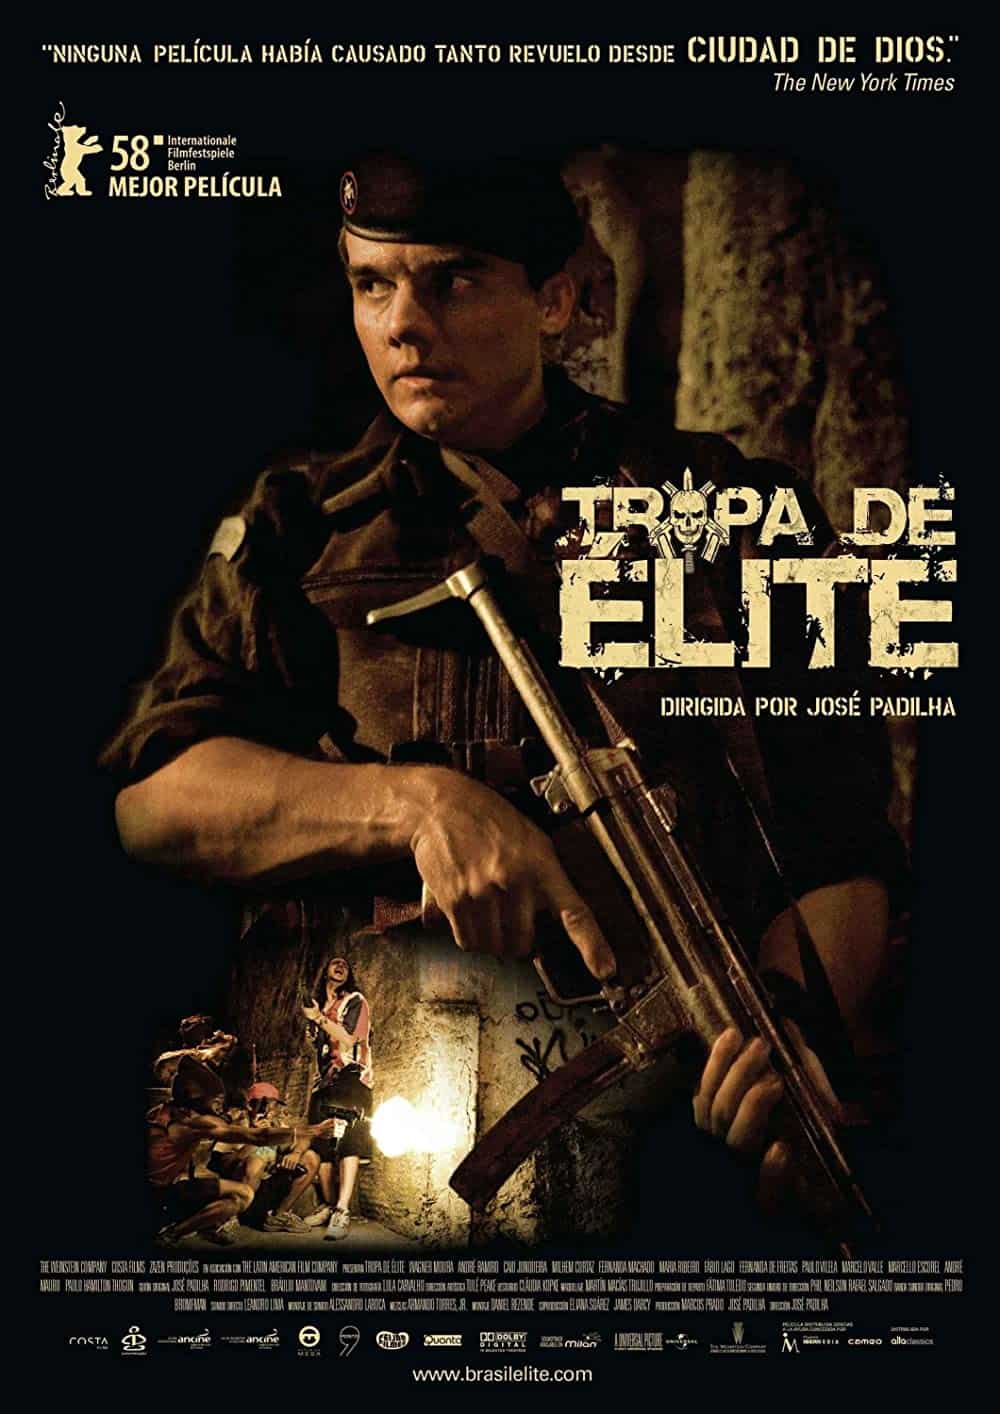 Elite Squad (2007) Best Special Forces Movies You Can't Miss